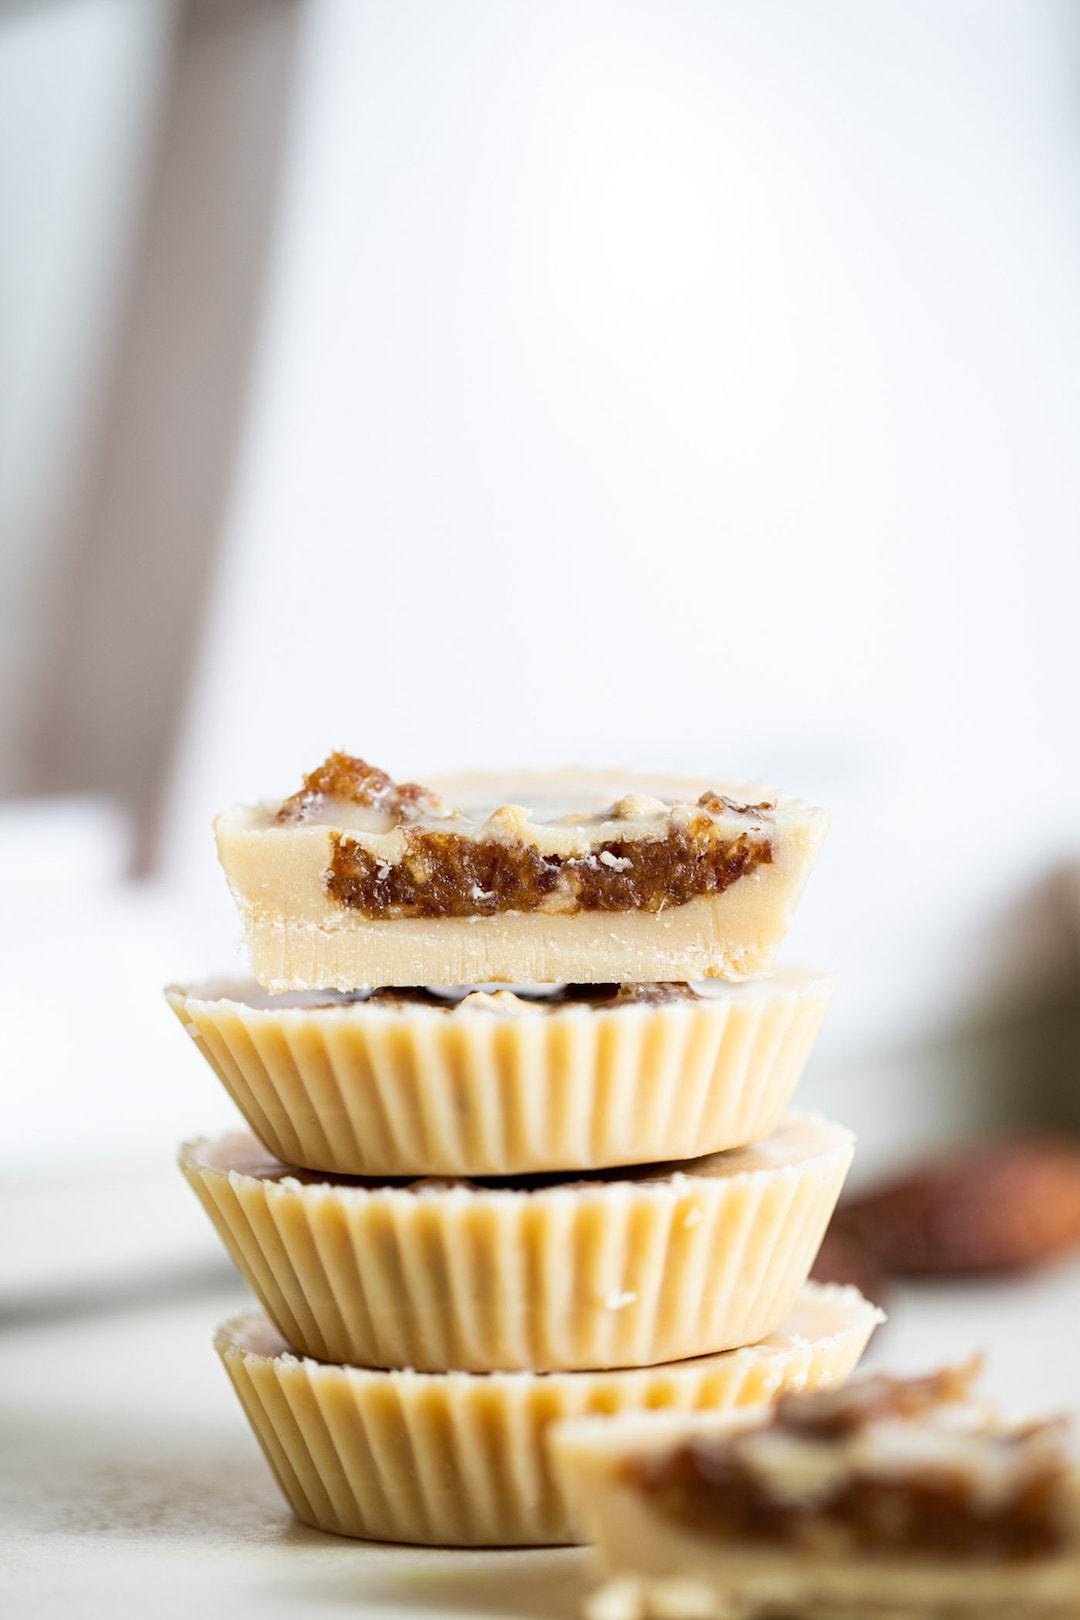 12 Super Easy Plant Based Desserts - Salted Tahini Caramel Cups